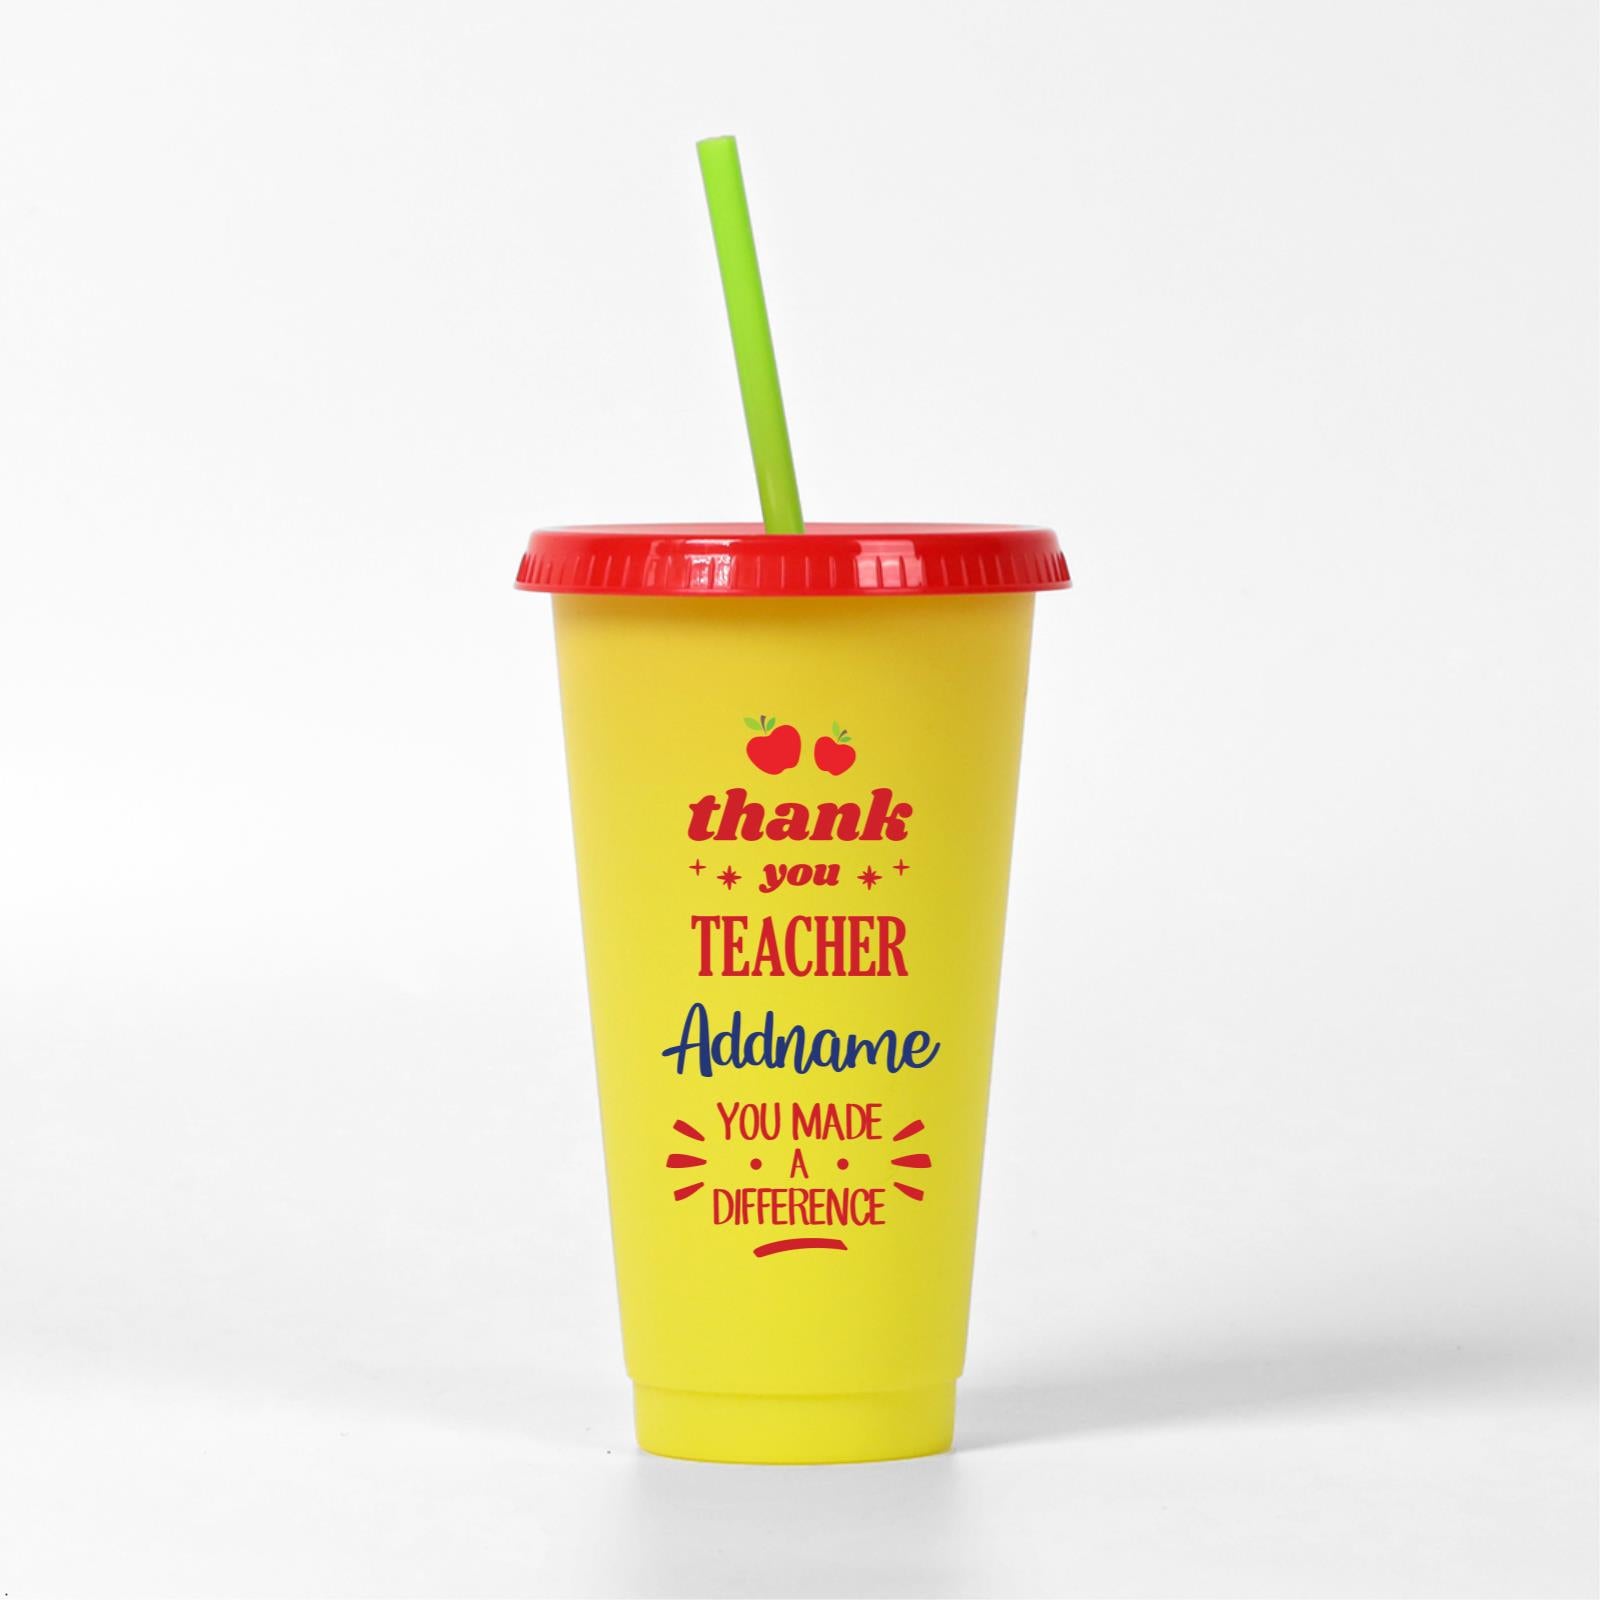 Thank You Teacher Addname You Made A Difference Quote - Yellow Kori Cup